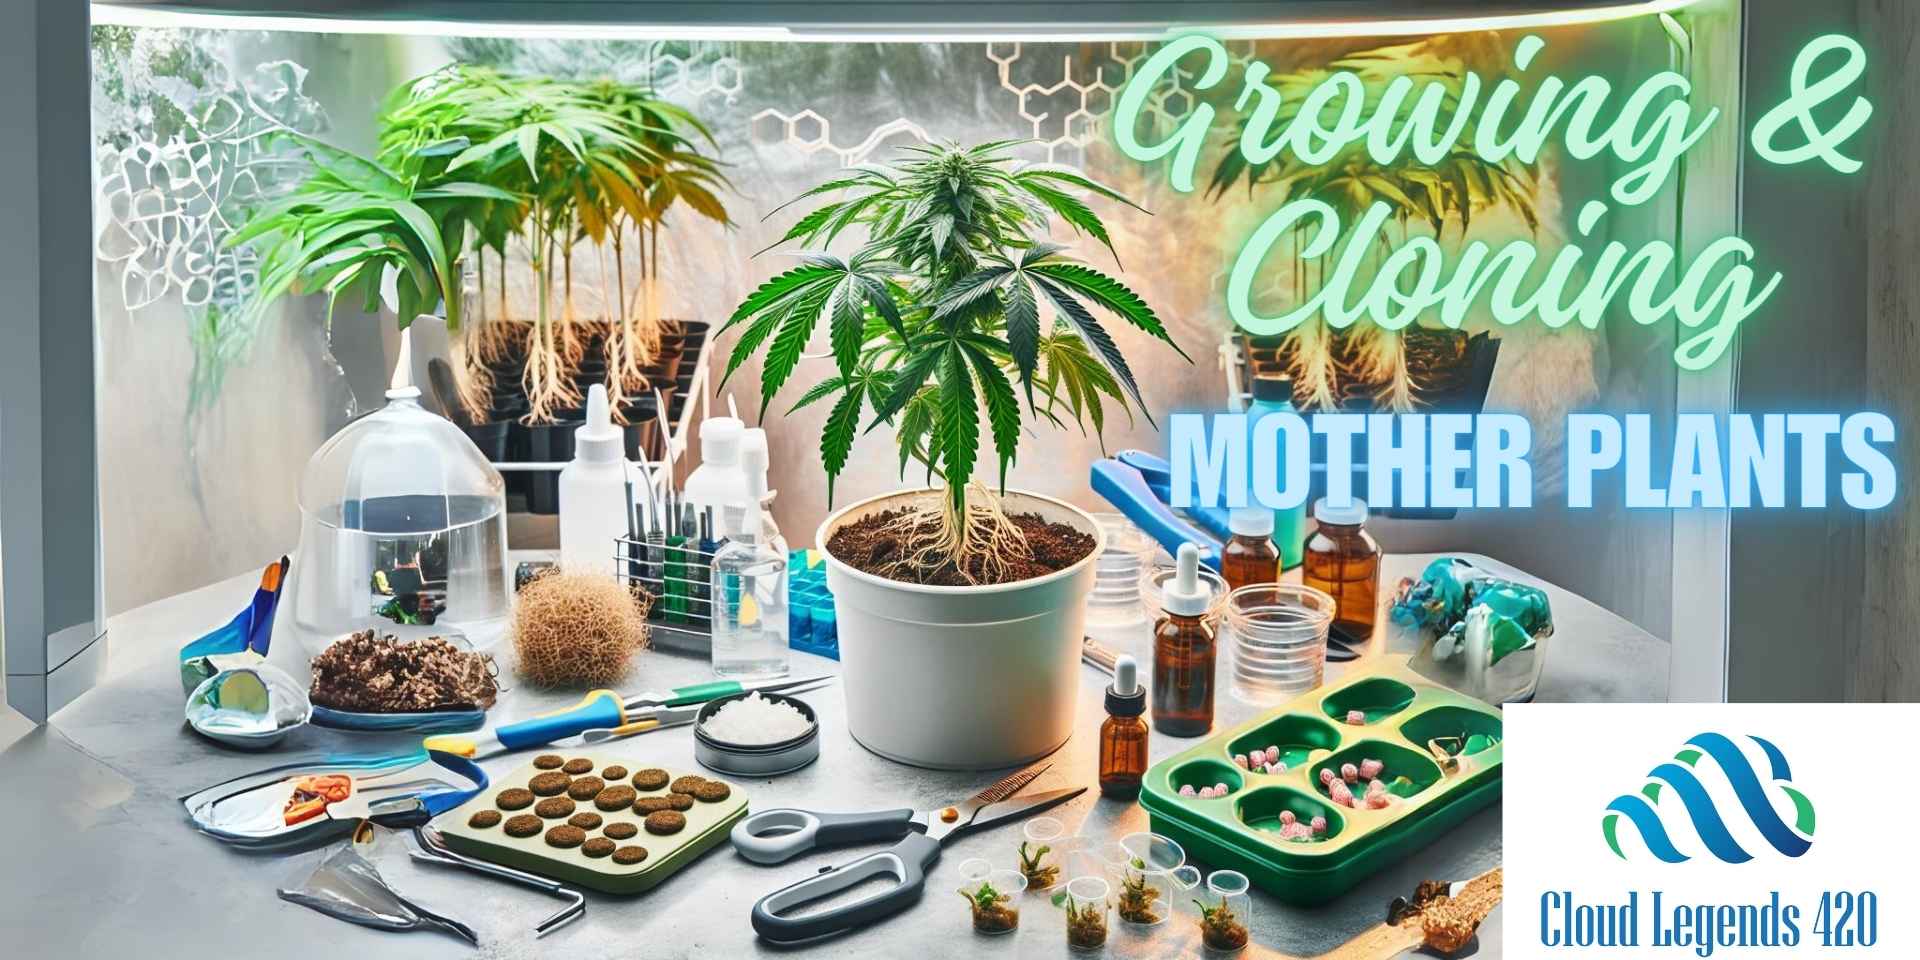 Growing and Cloning Cannabis Mother plants: Best Practices Banner by Cloud Legends 420